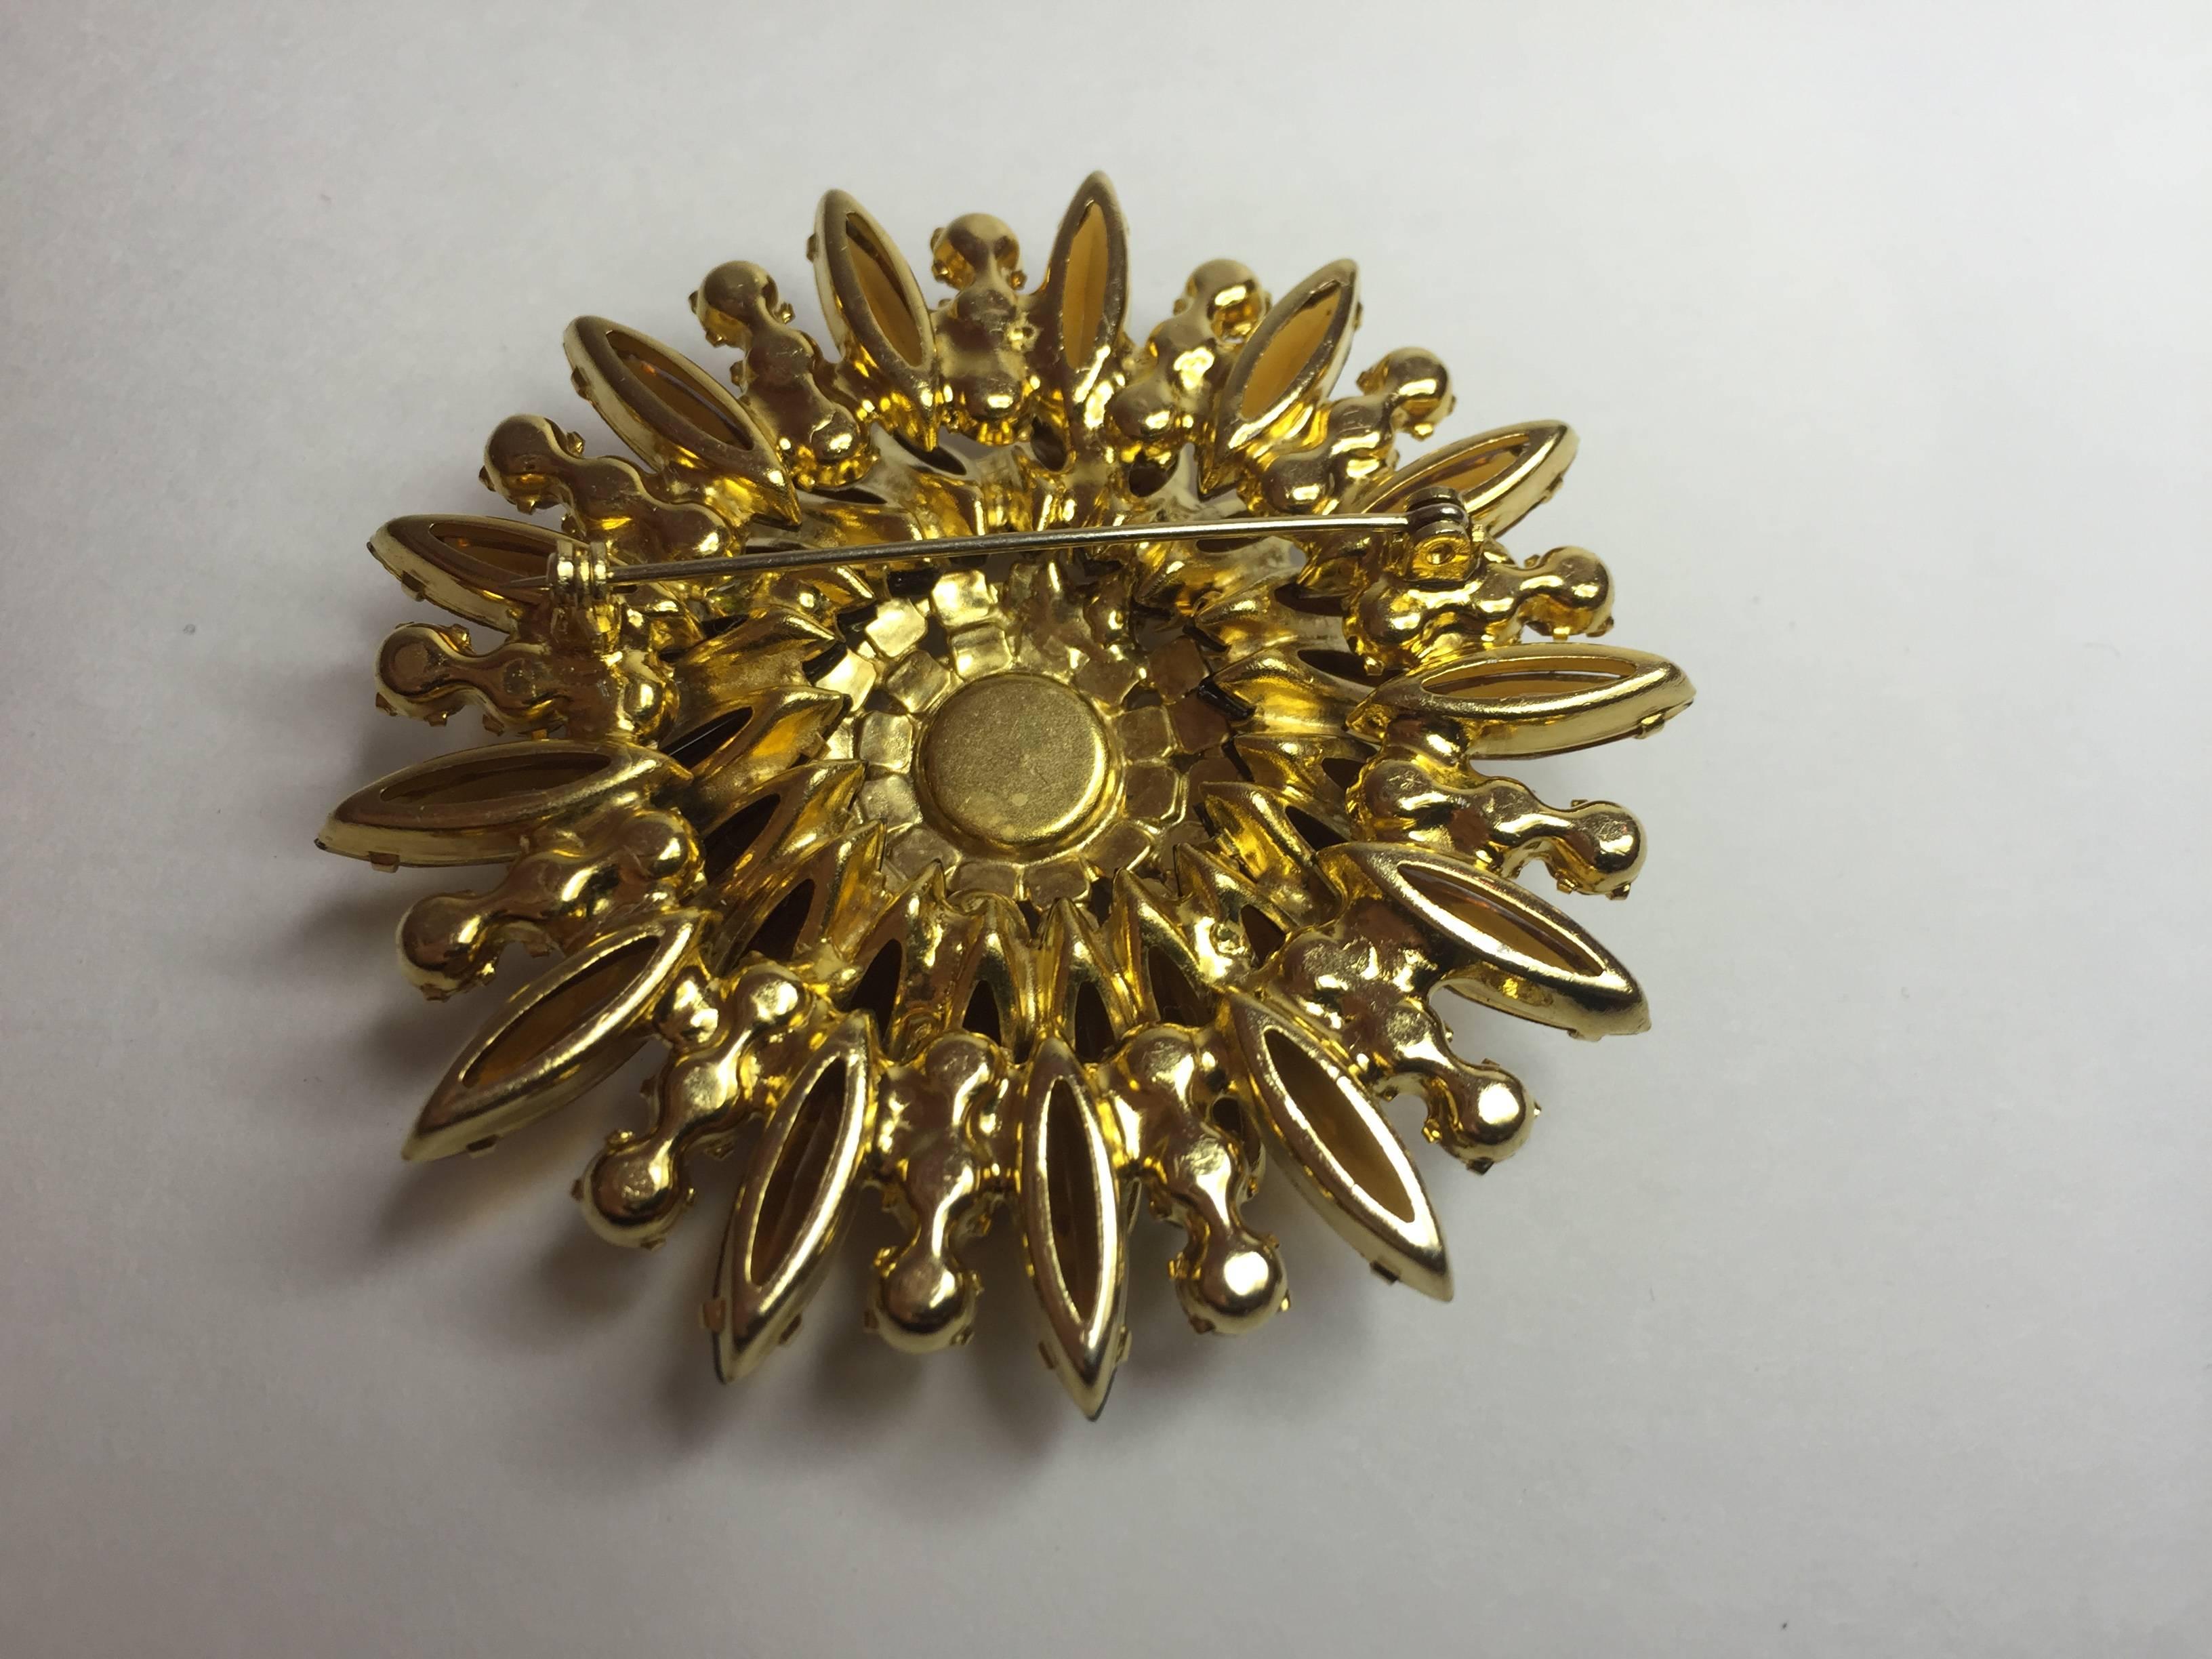 A classic 1960s Delizza and Elster D & E NavetteTopaz BURST Brooch Pin, constructed wedding cake style built up to achieve optimal sculptural presence on its wearer. Approximately 2.25